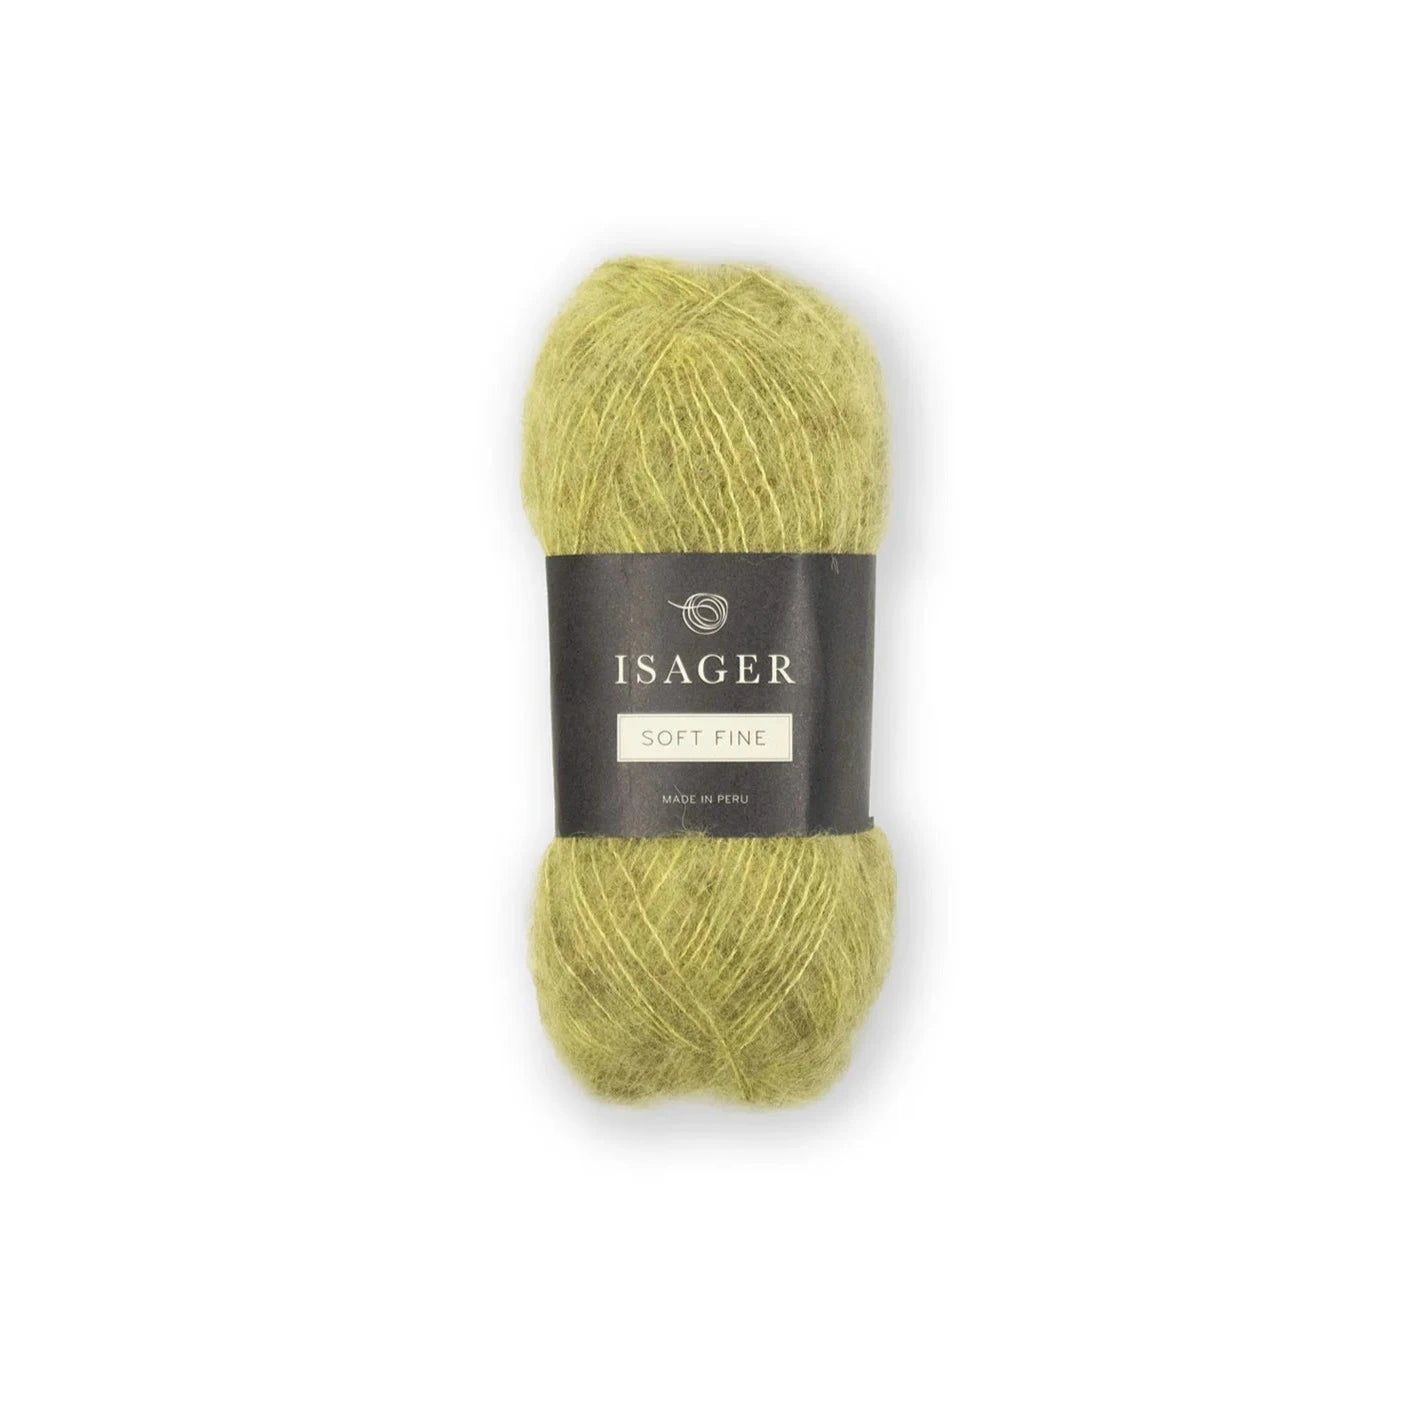 Isager Soft Fine - Isager - 35 - The Little Yarn Store